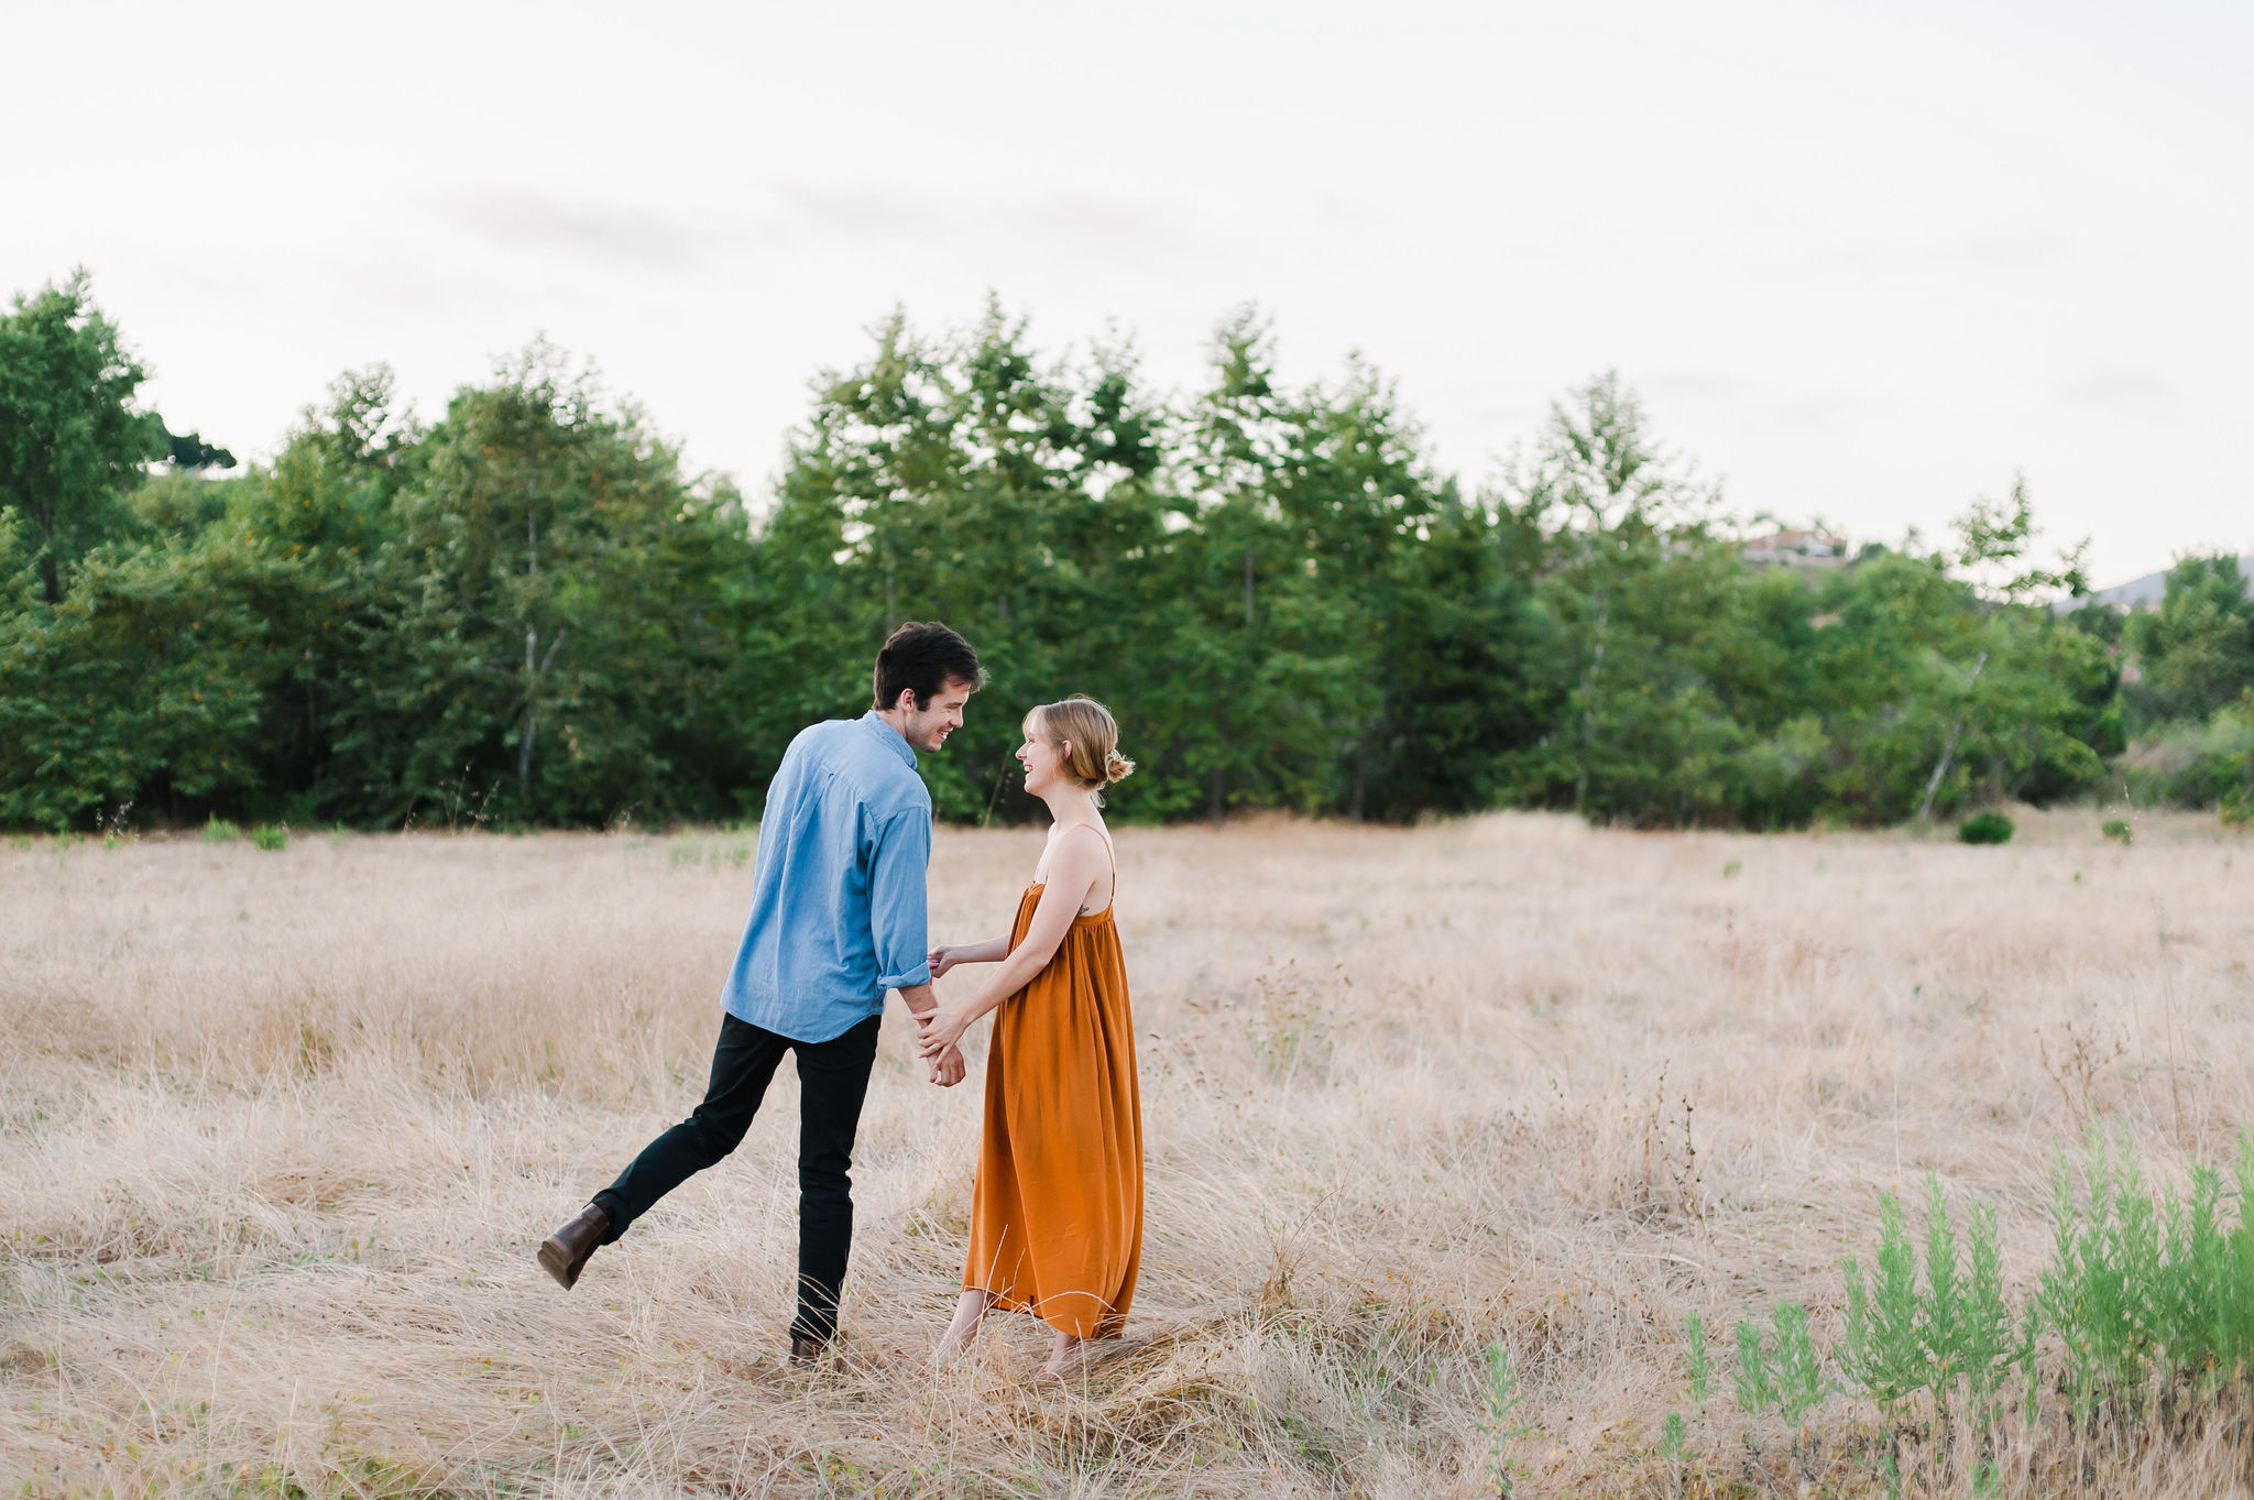 California Ranch House Engagement Session Amy Huang Photography Something Blue Weddings Blog